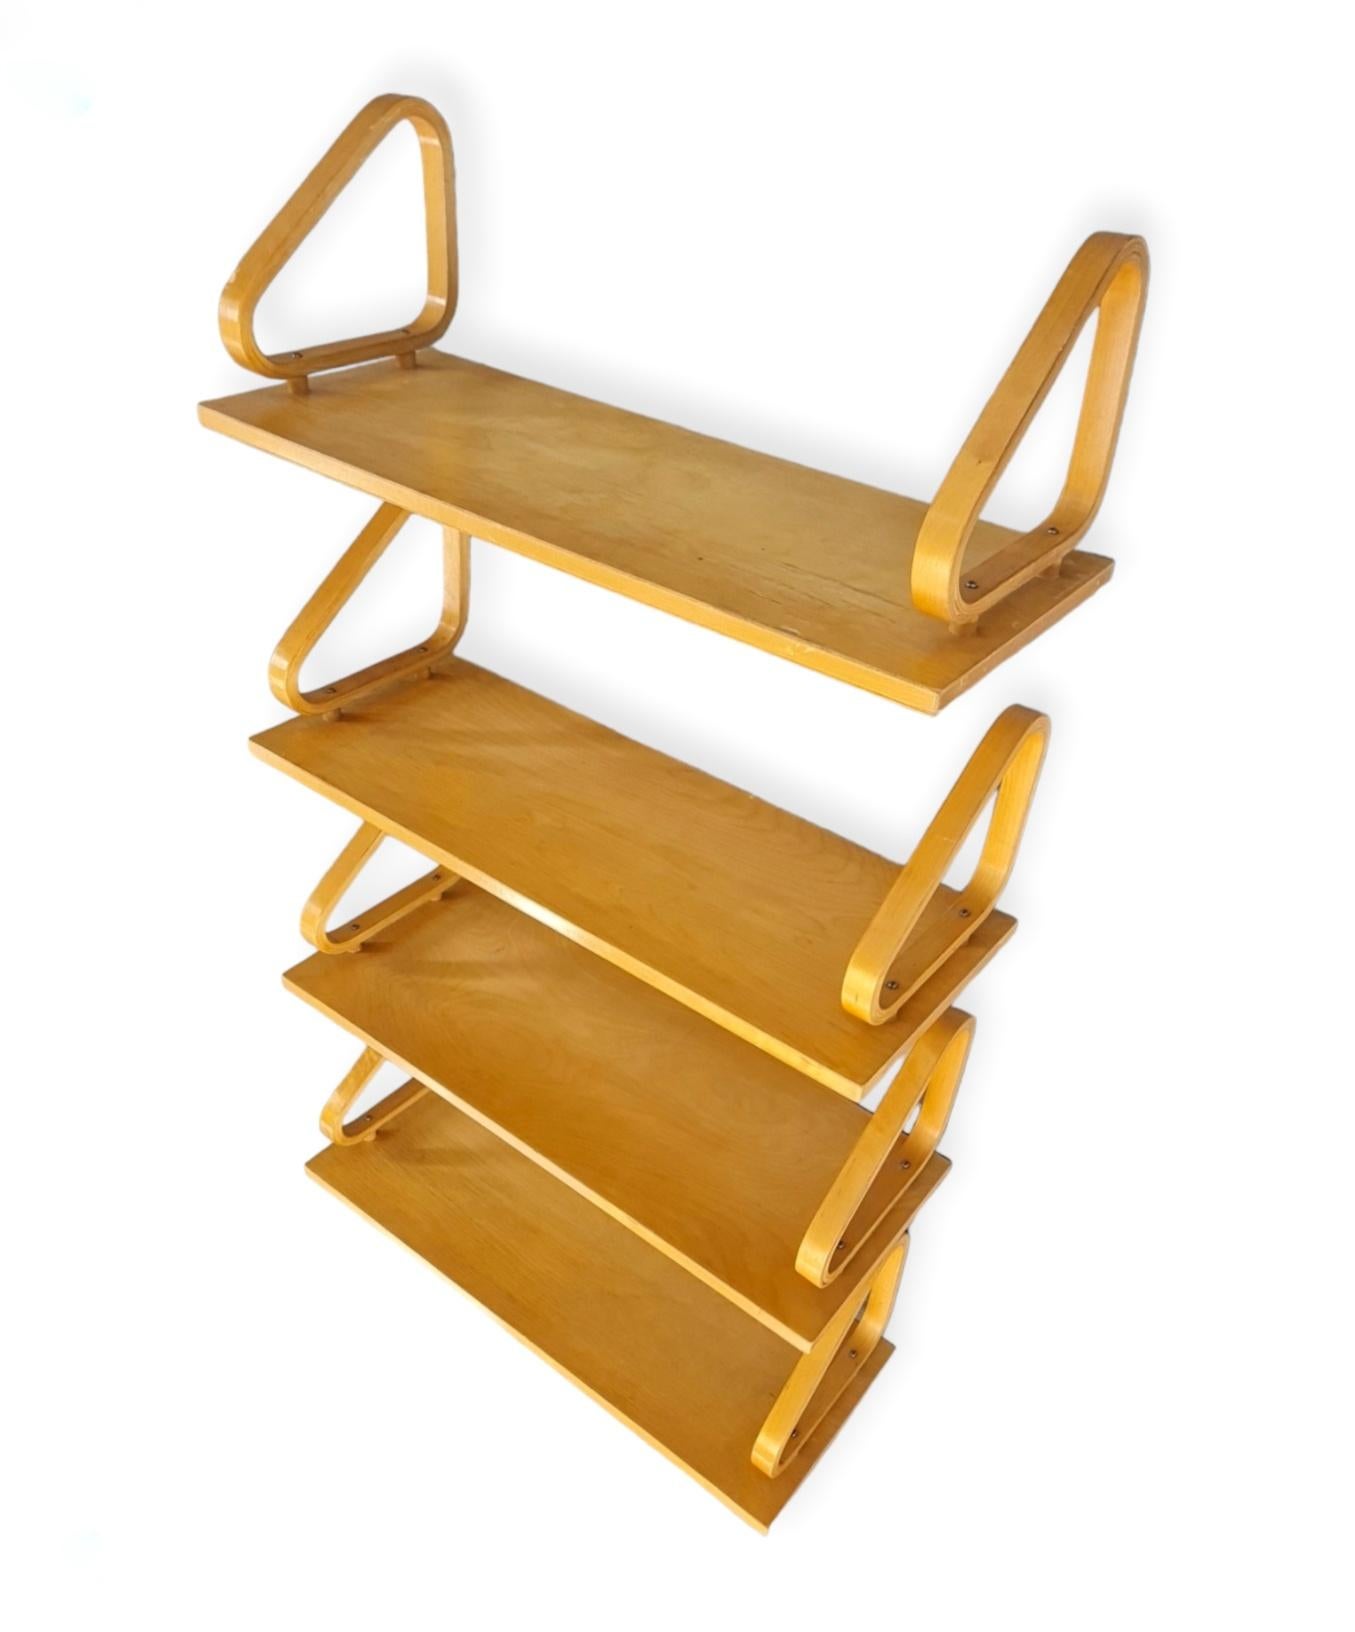 Rare Set of 4 Alvar Aalto Wall Shelves Model 112 with Pegs, 1930s.  For Sale 6